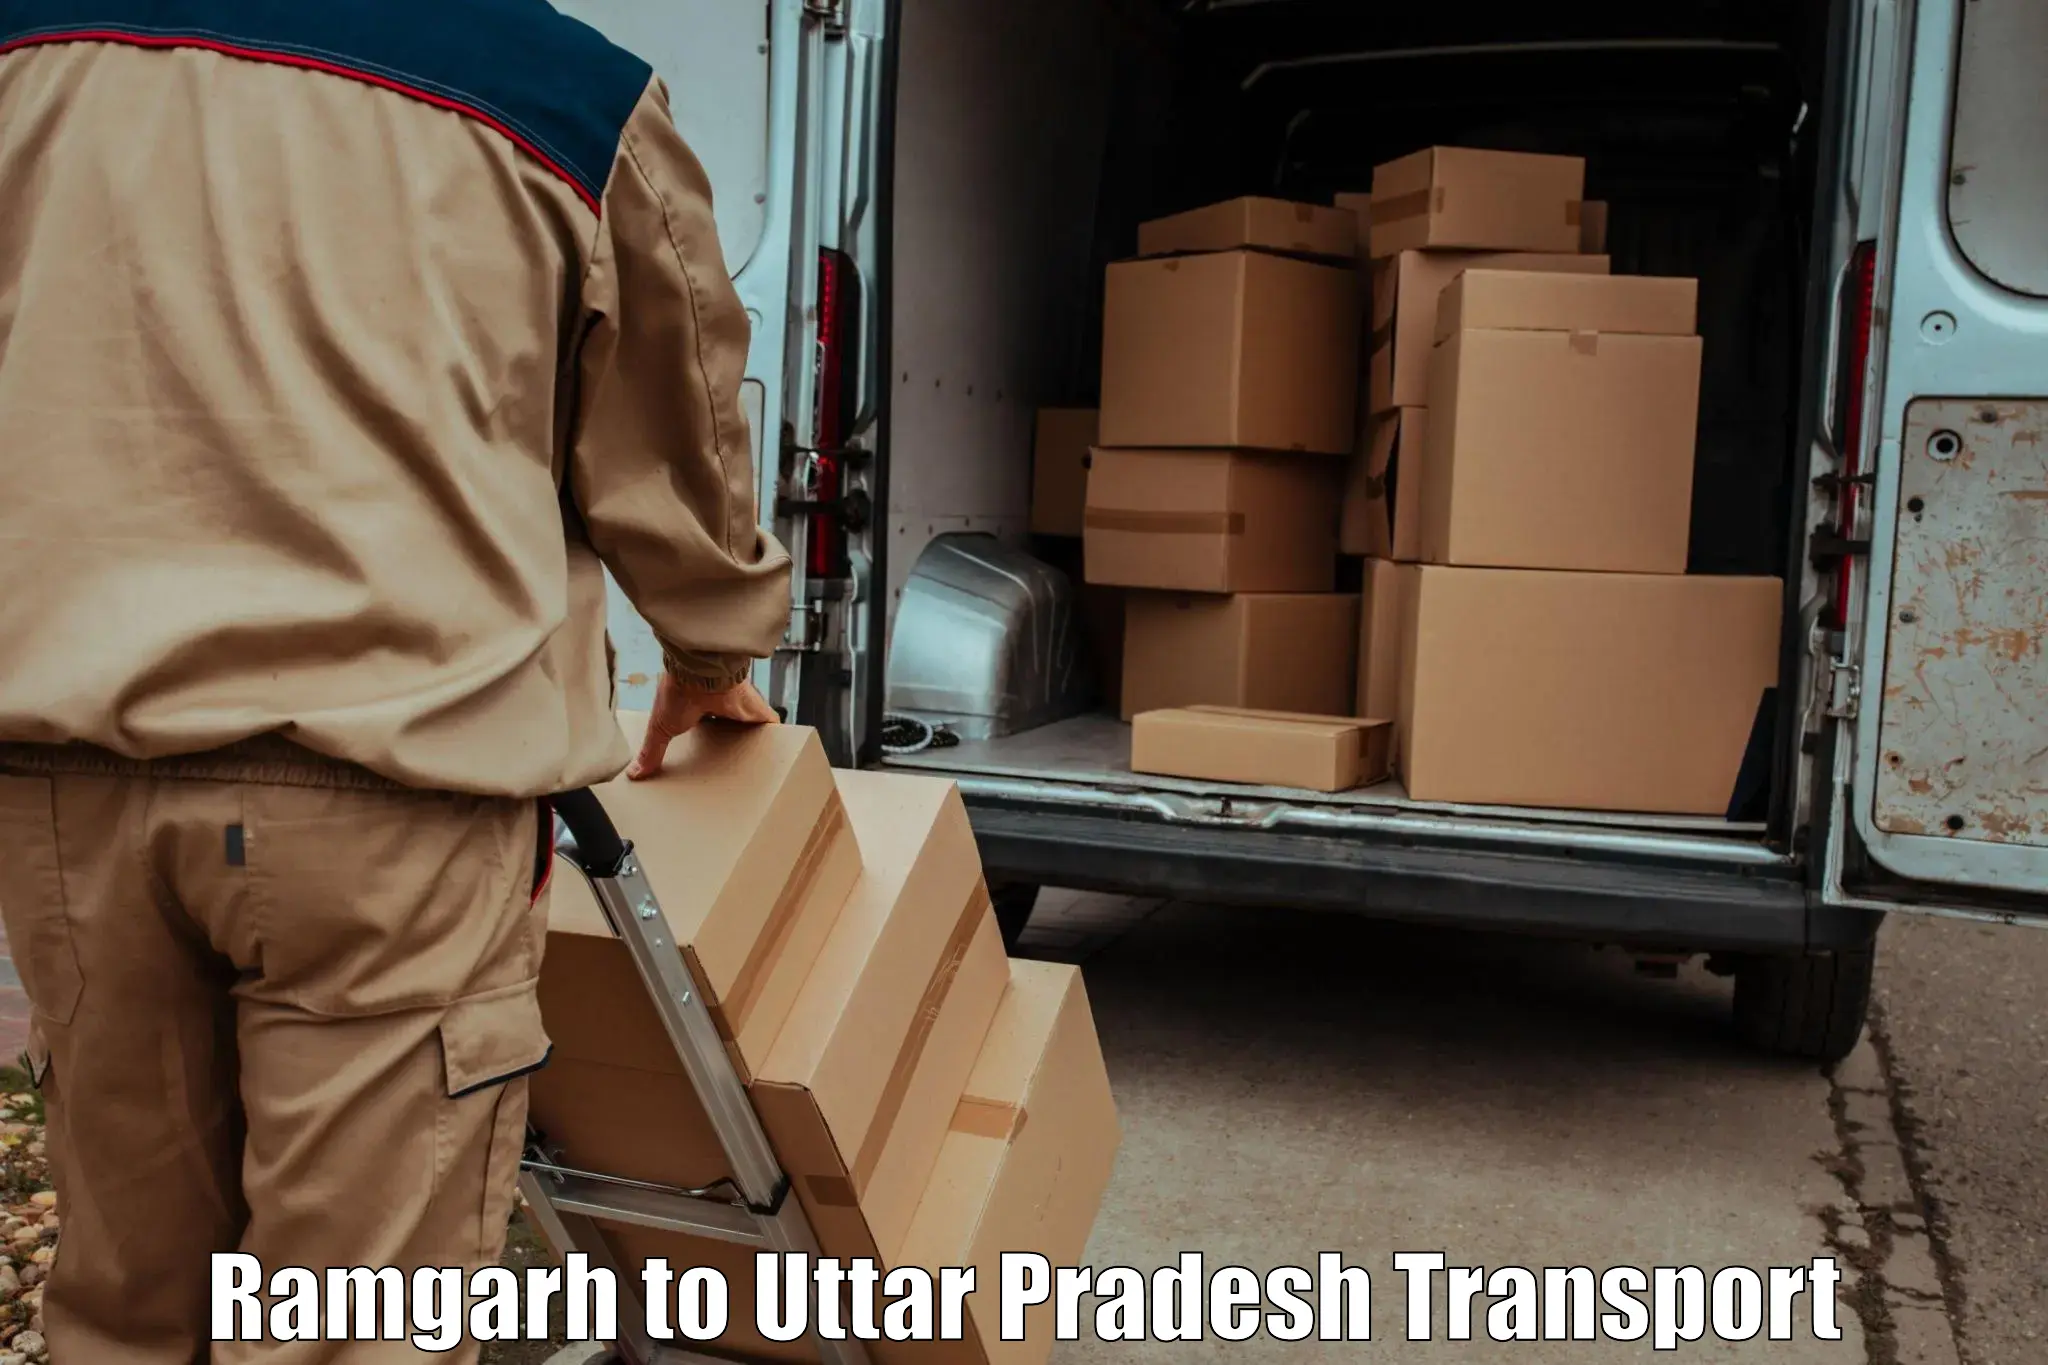 Truck transport companies in India Ramgarh to Baraut